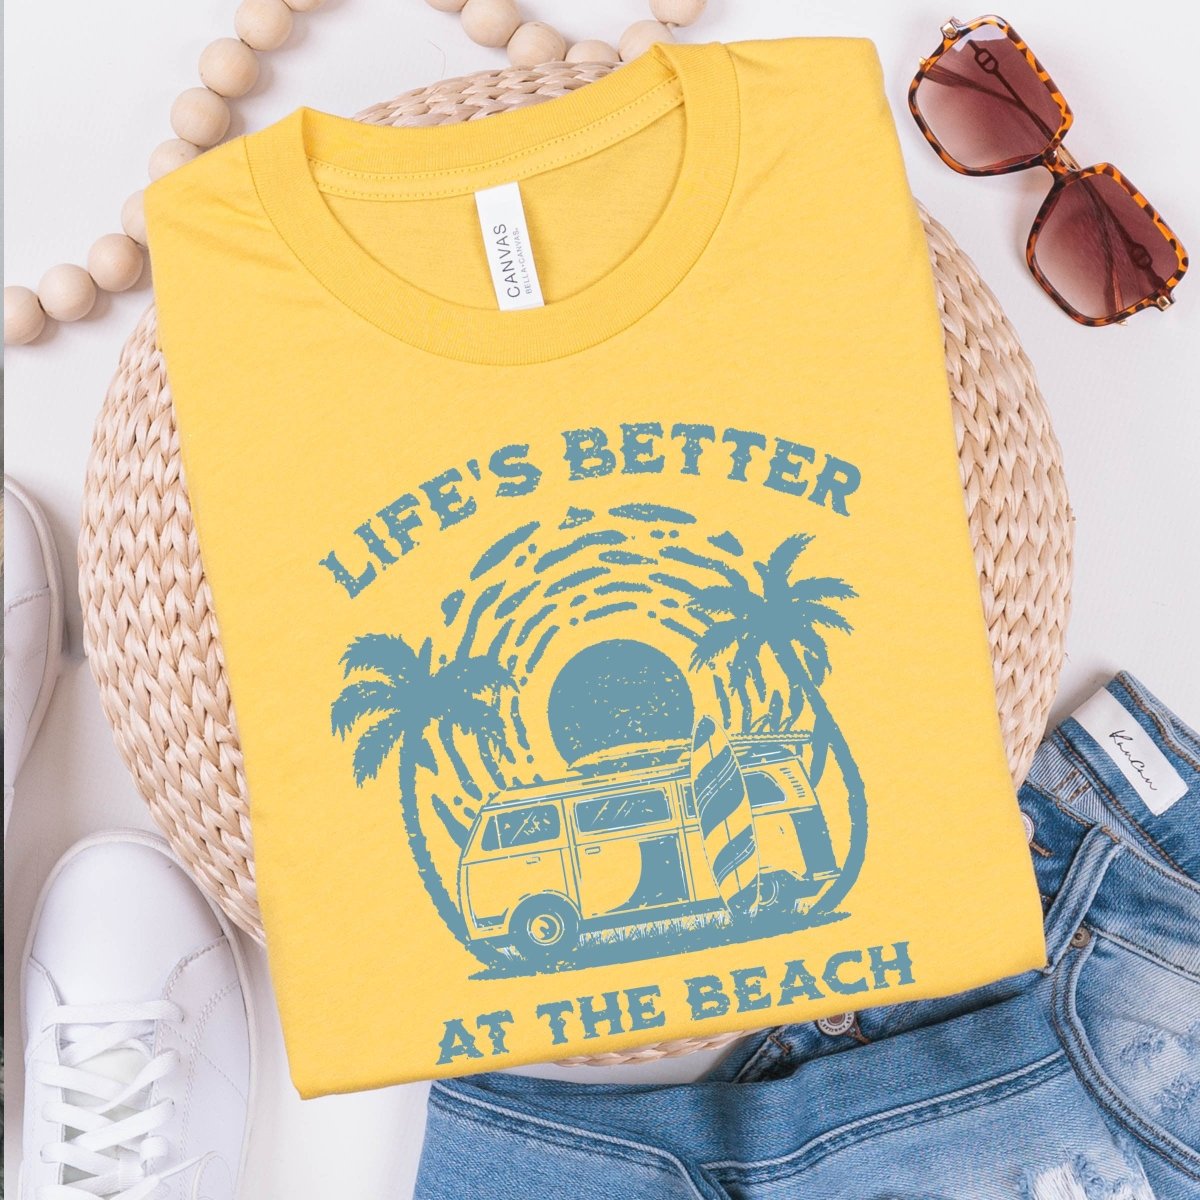 Life is better at the beach Tee - Limeberry Designs